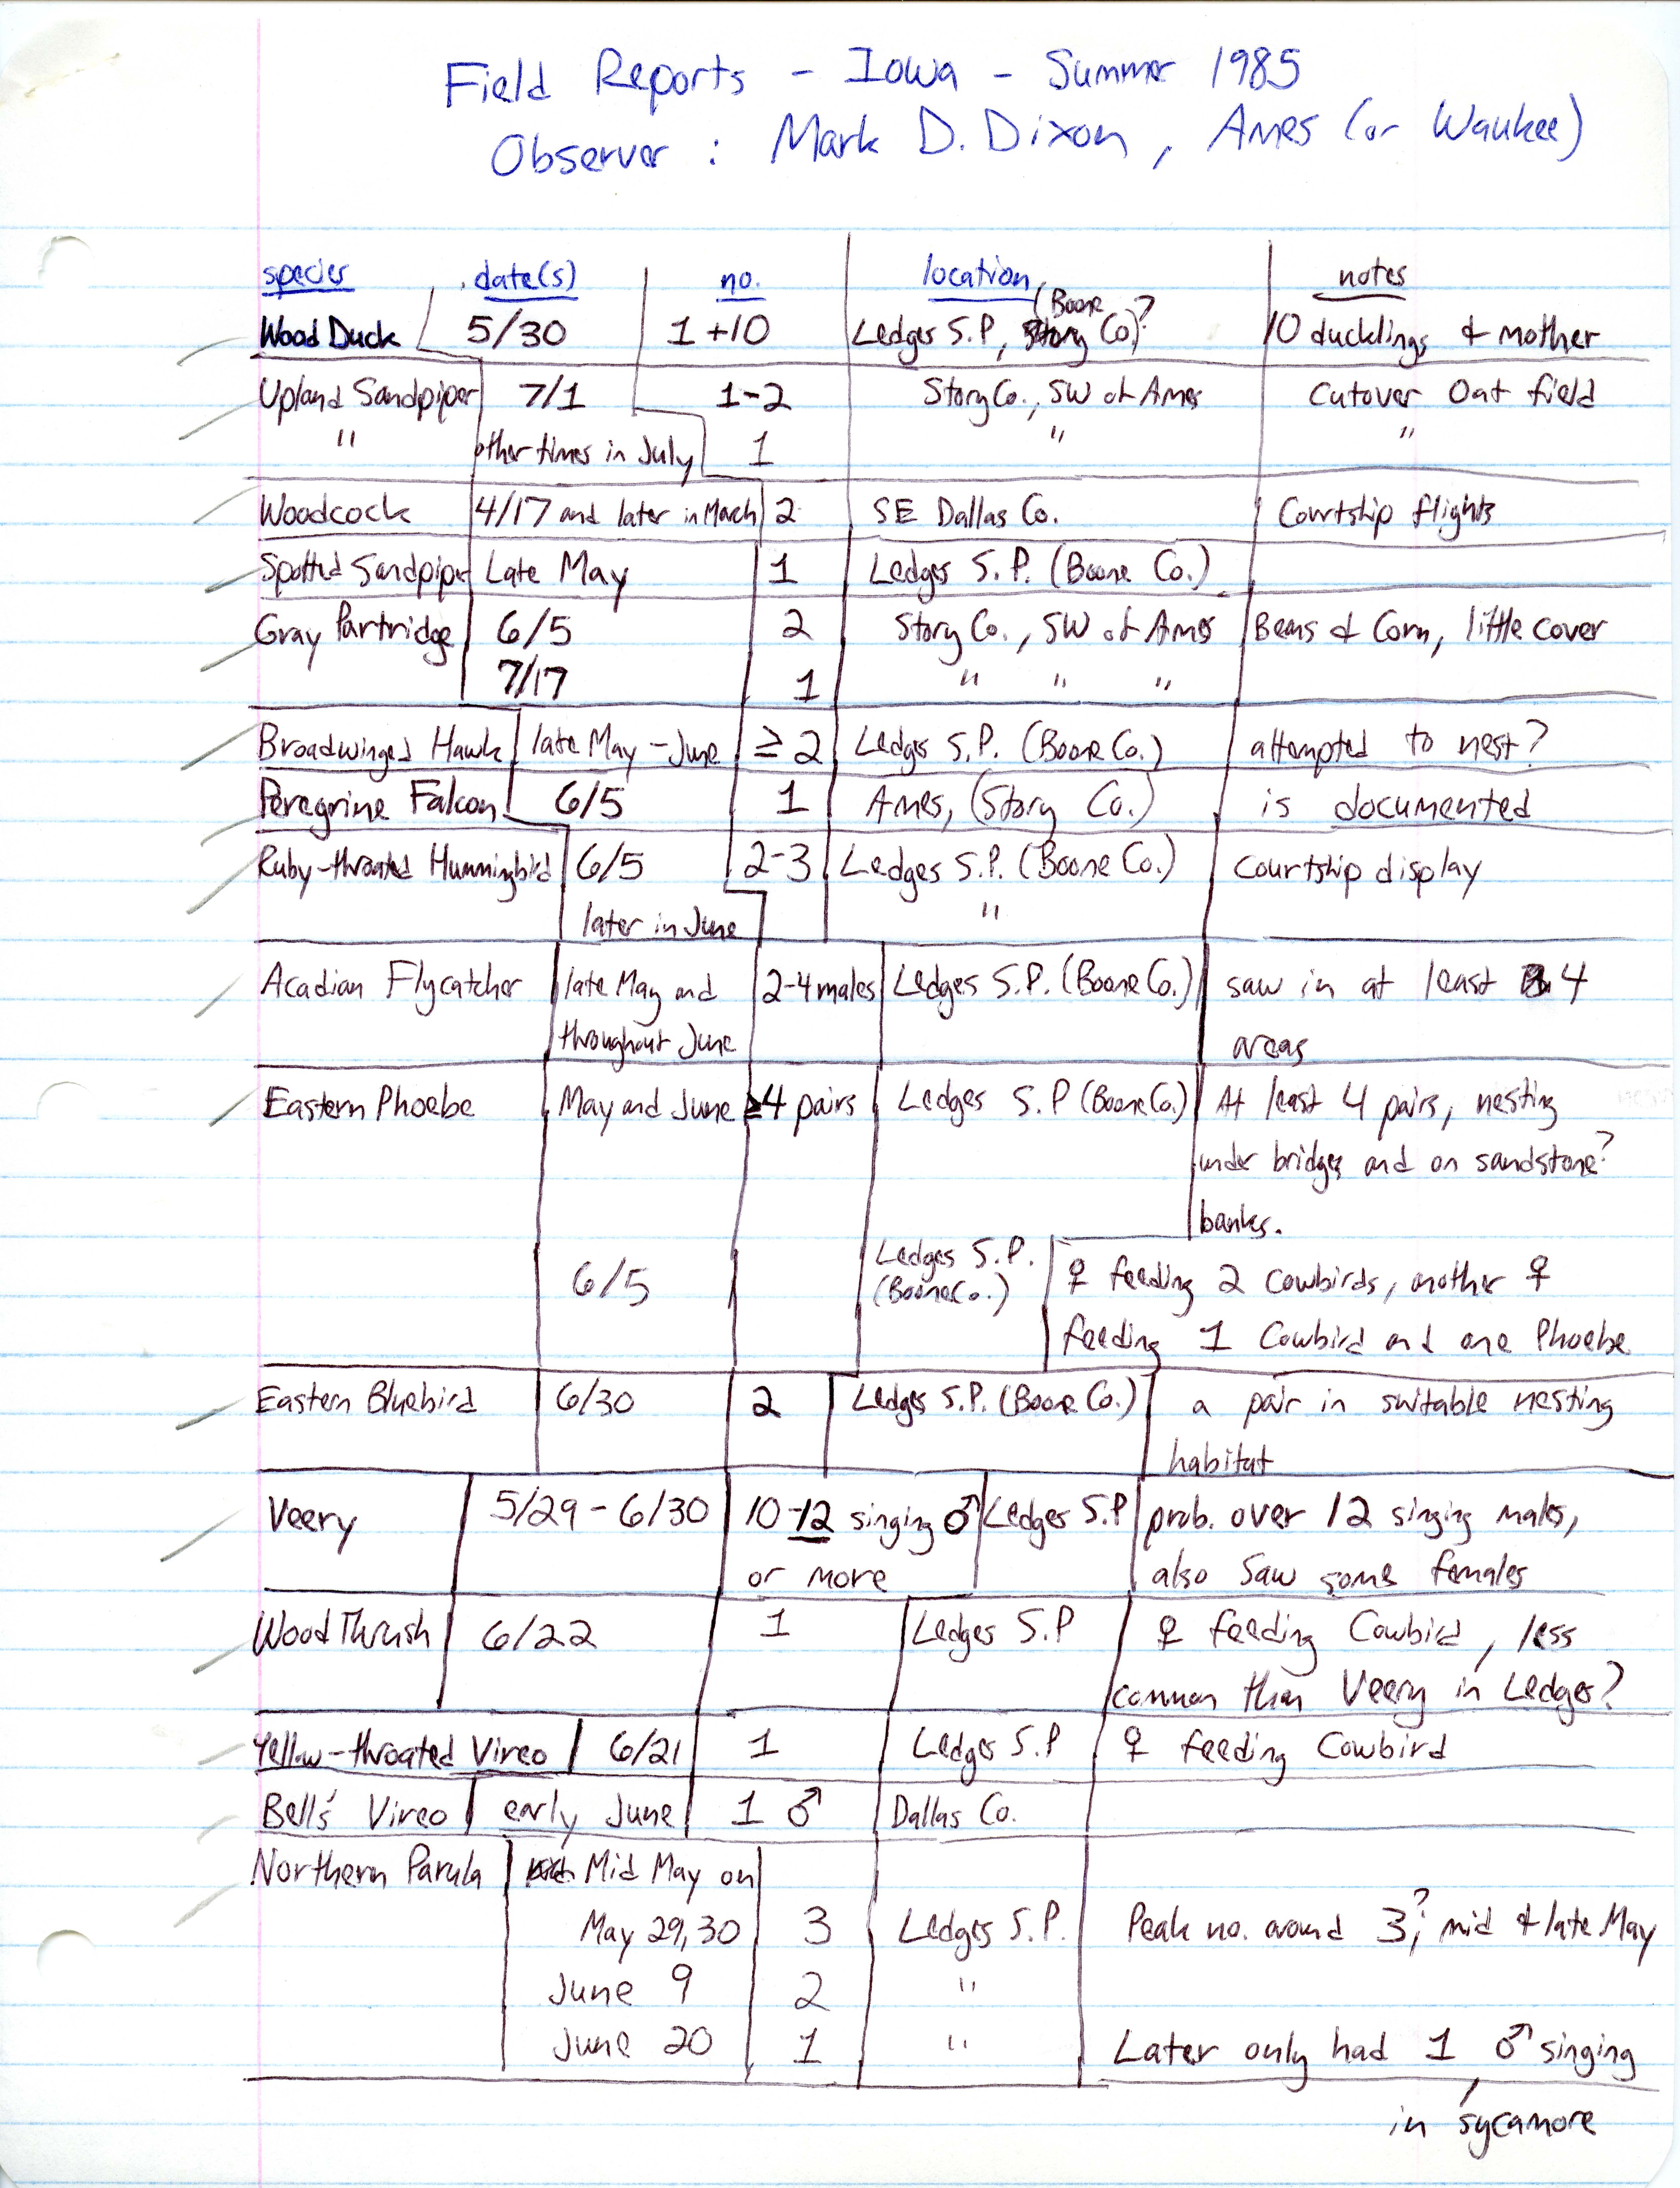 Field notes contributed by Mark D. Dixon, summer 1985